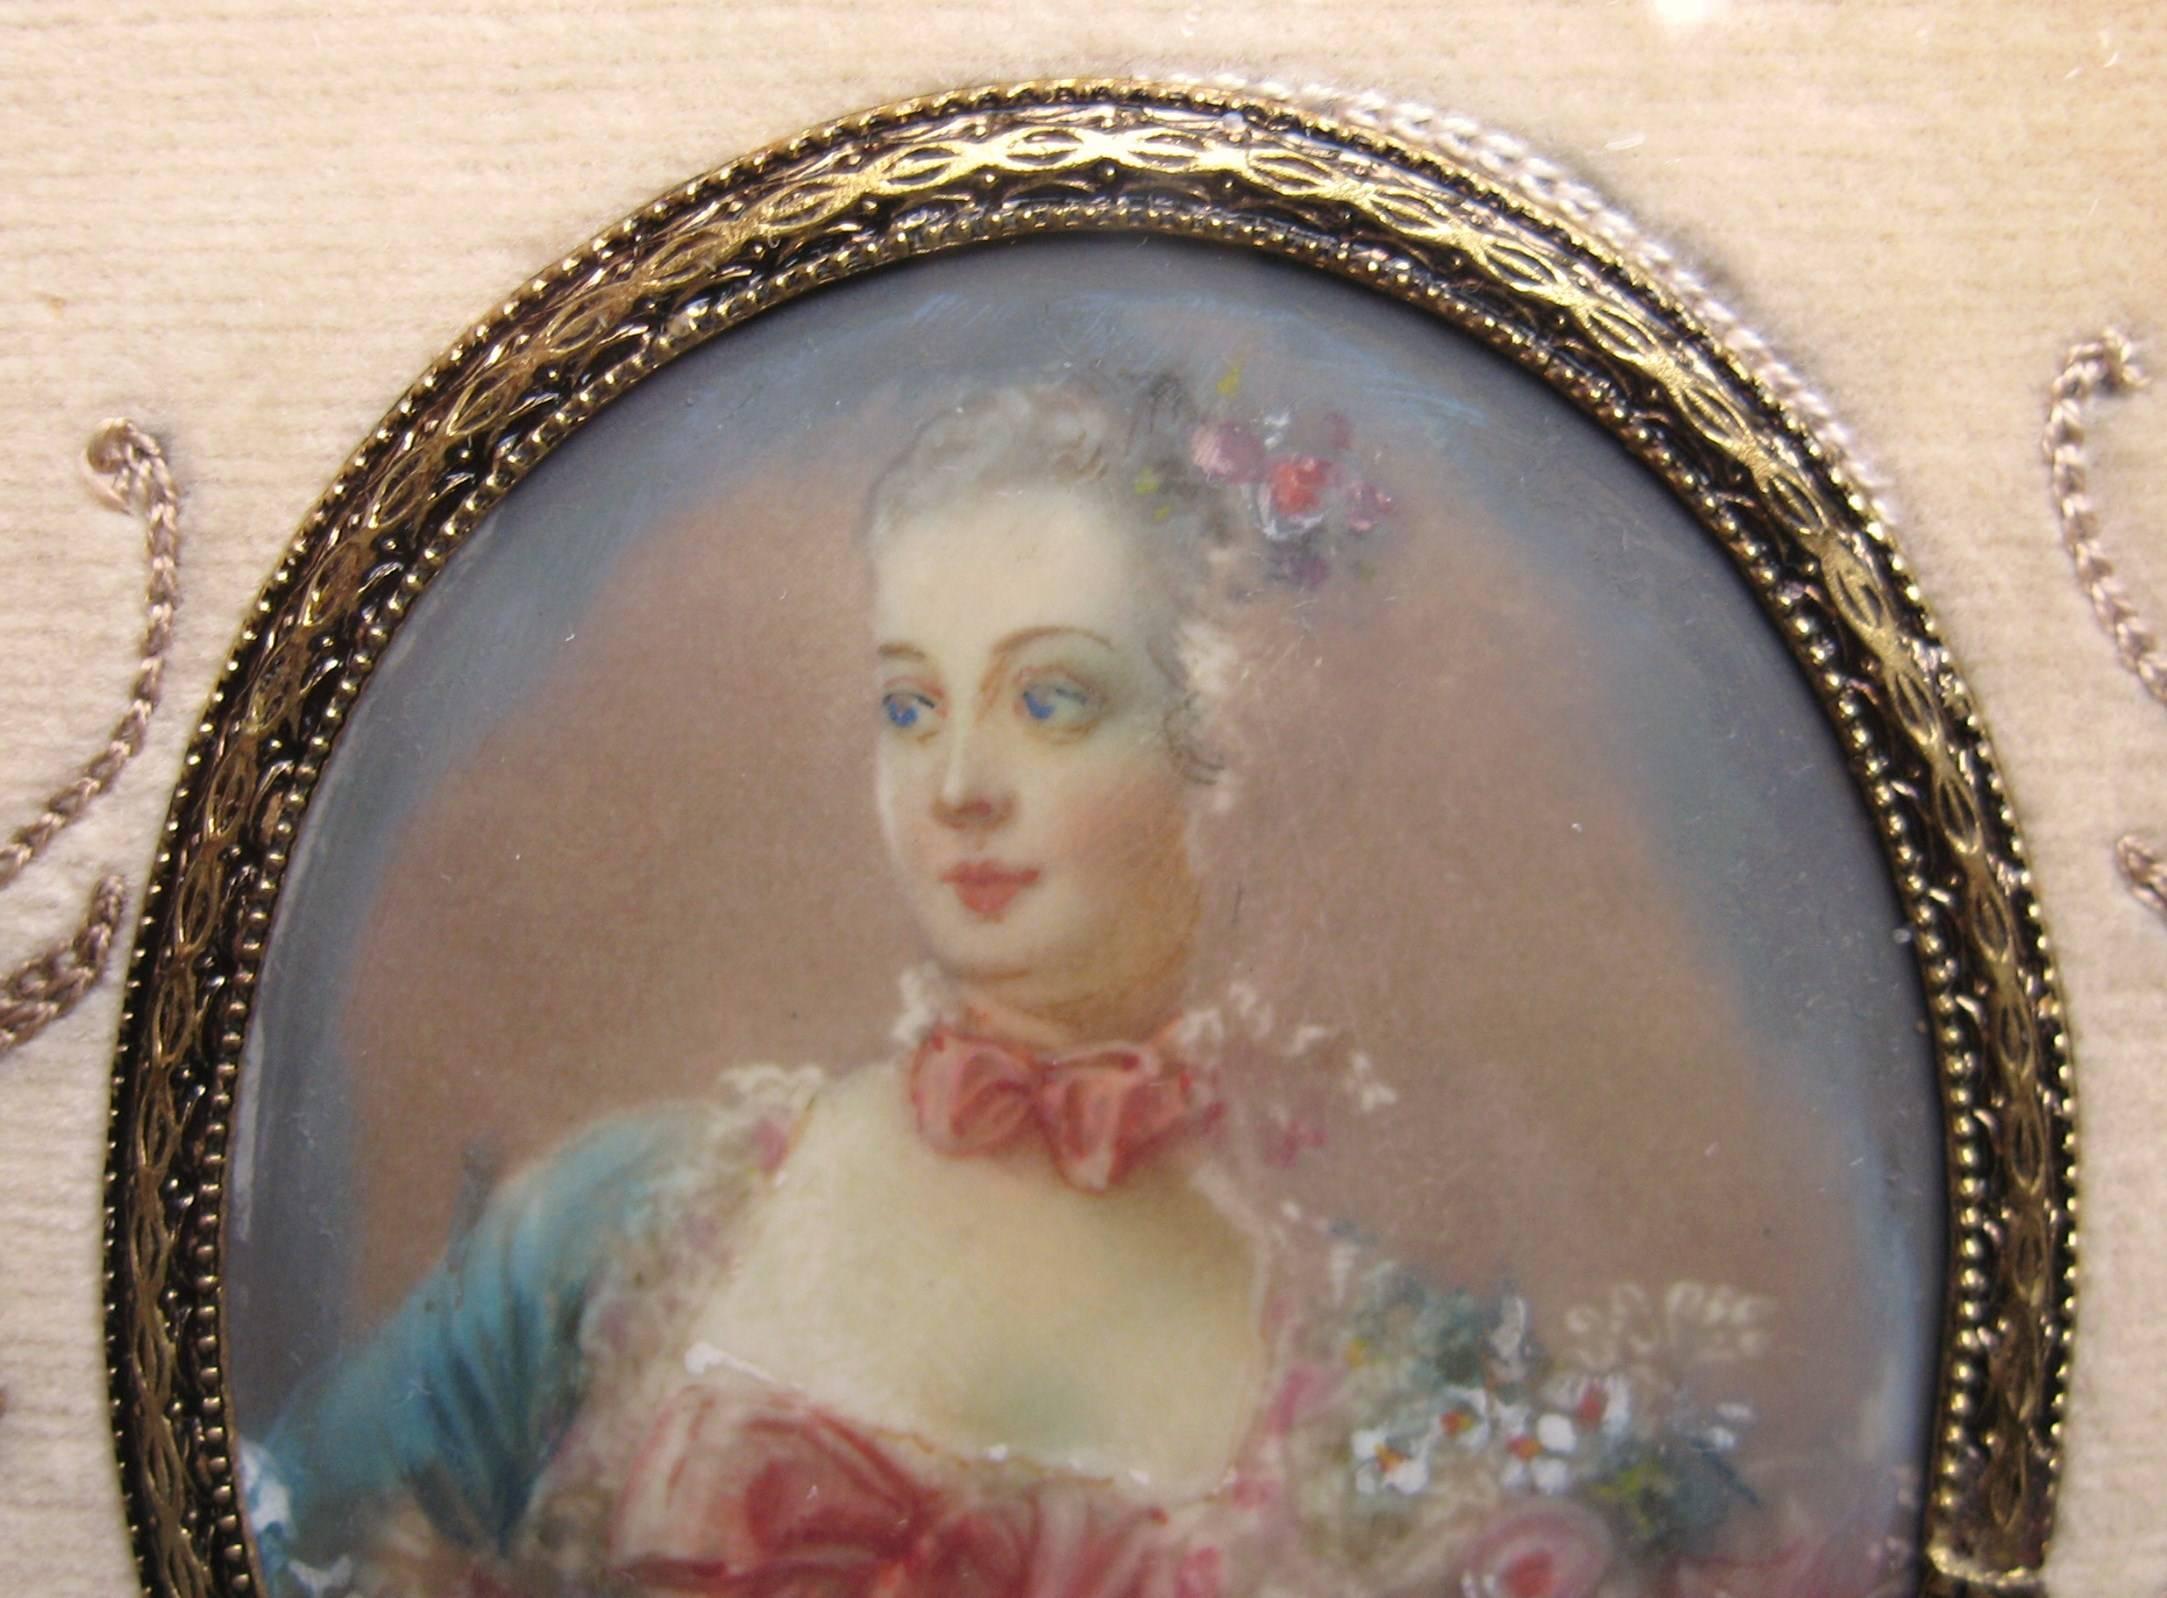 Regency Early 19th Century Fancy Maiden Miniature Portrait Embroidered Frame For Sale